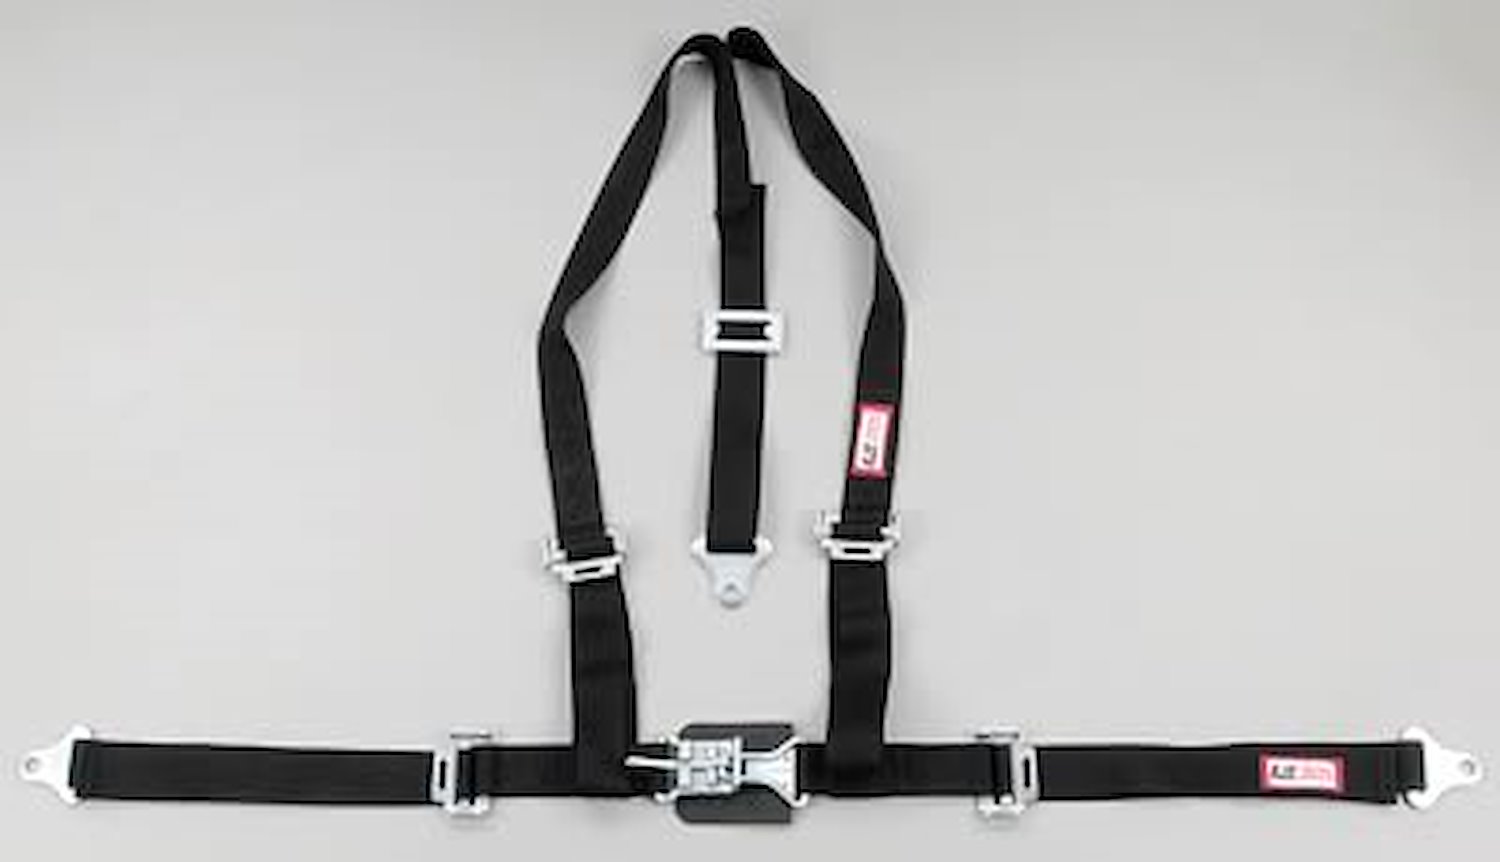 NON-SFI L&L HARNESS 2 PULL UP Lap Belt SNAP SEWN IN 2 S.H. Individual ROLL BAR Mount w/STERNUM STRAP WRAP/BOLT BLACK